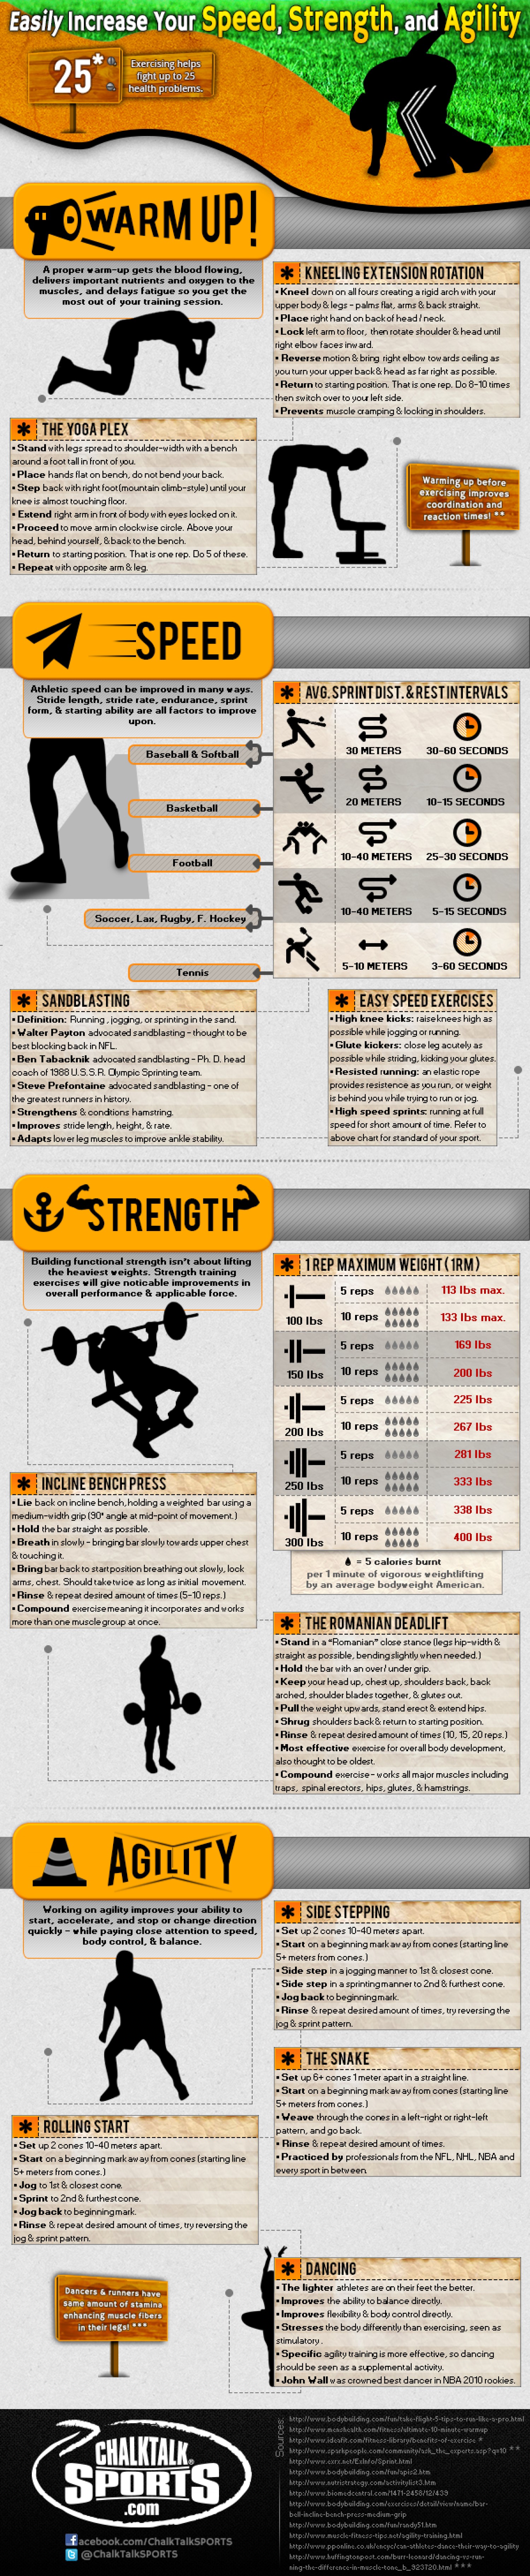 easily-increase-your-speed-strength--agility_51e4c498791dd_w1500